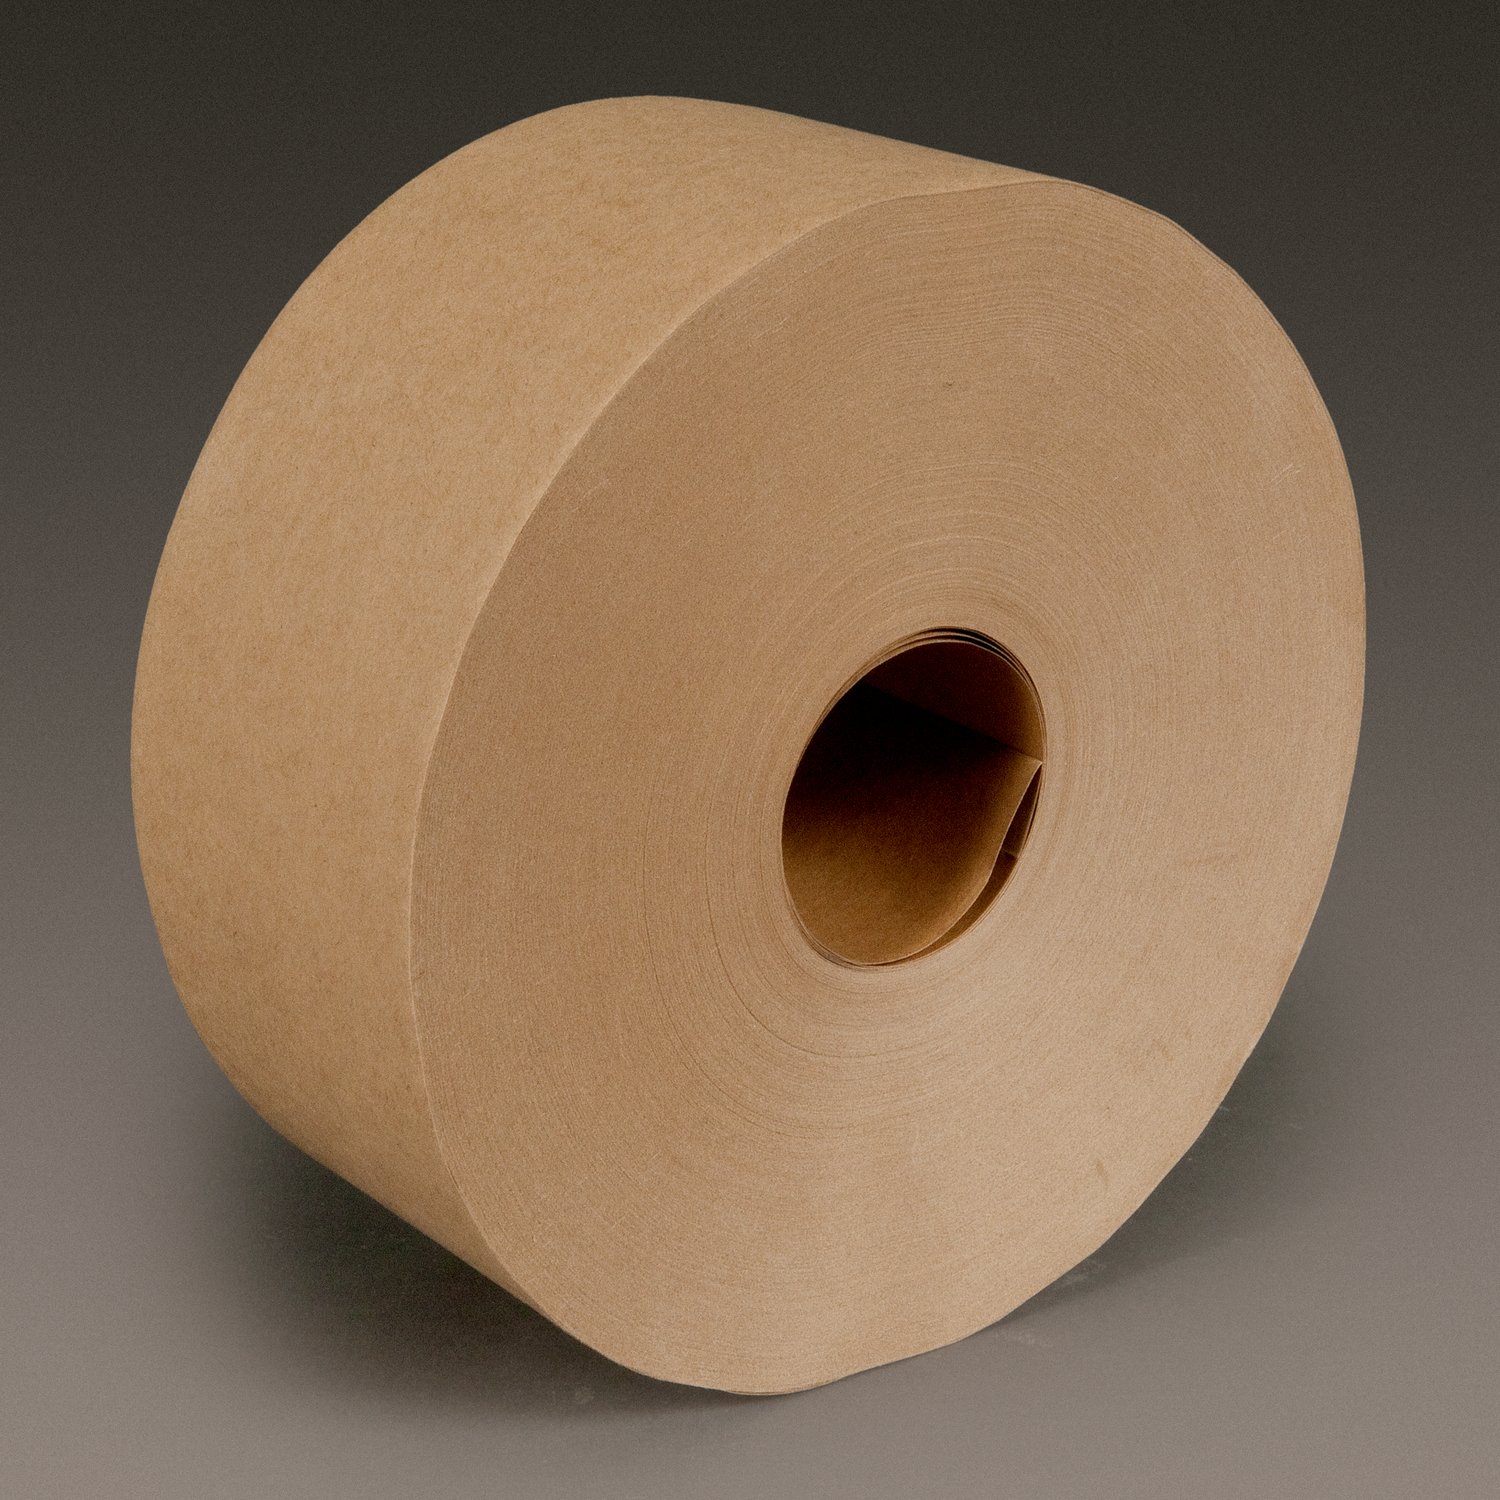 7000049628 - 3M Water Activated Paper Tape 6142, Natural, Medium Duty, 3 in x 600
ft, 10/Case